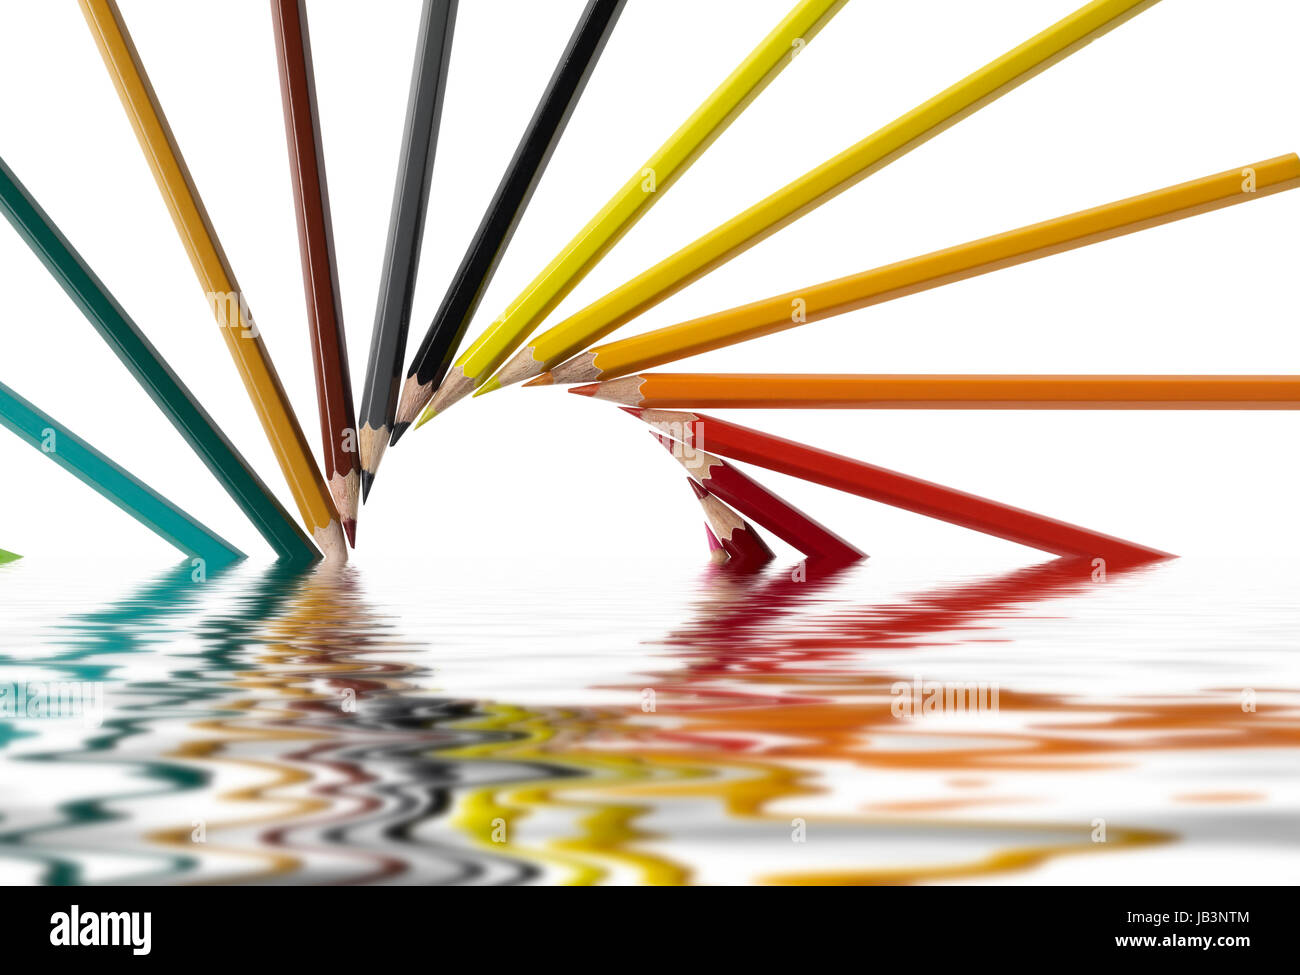 sunken pencil arrangement on reflective water surface in white back Stock Photo